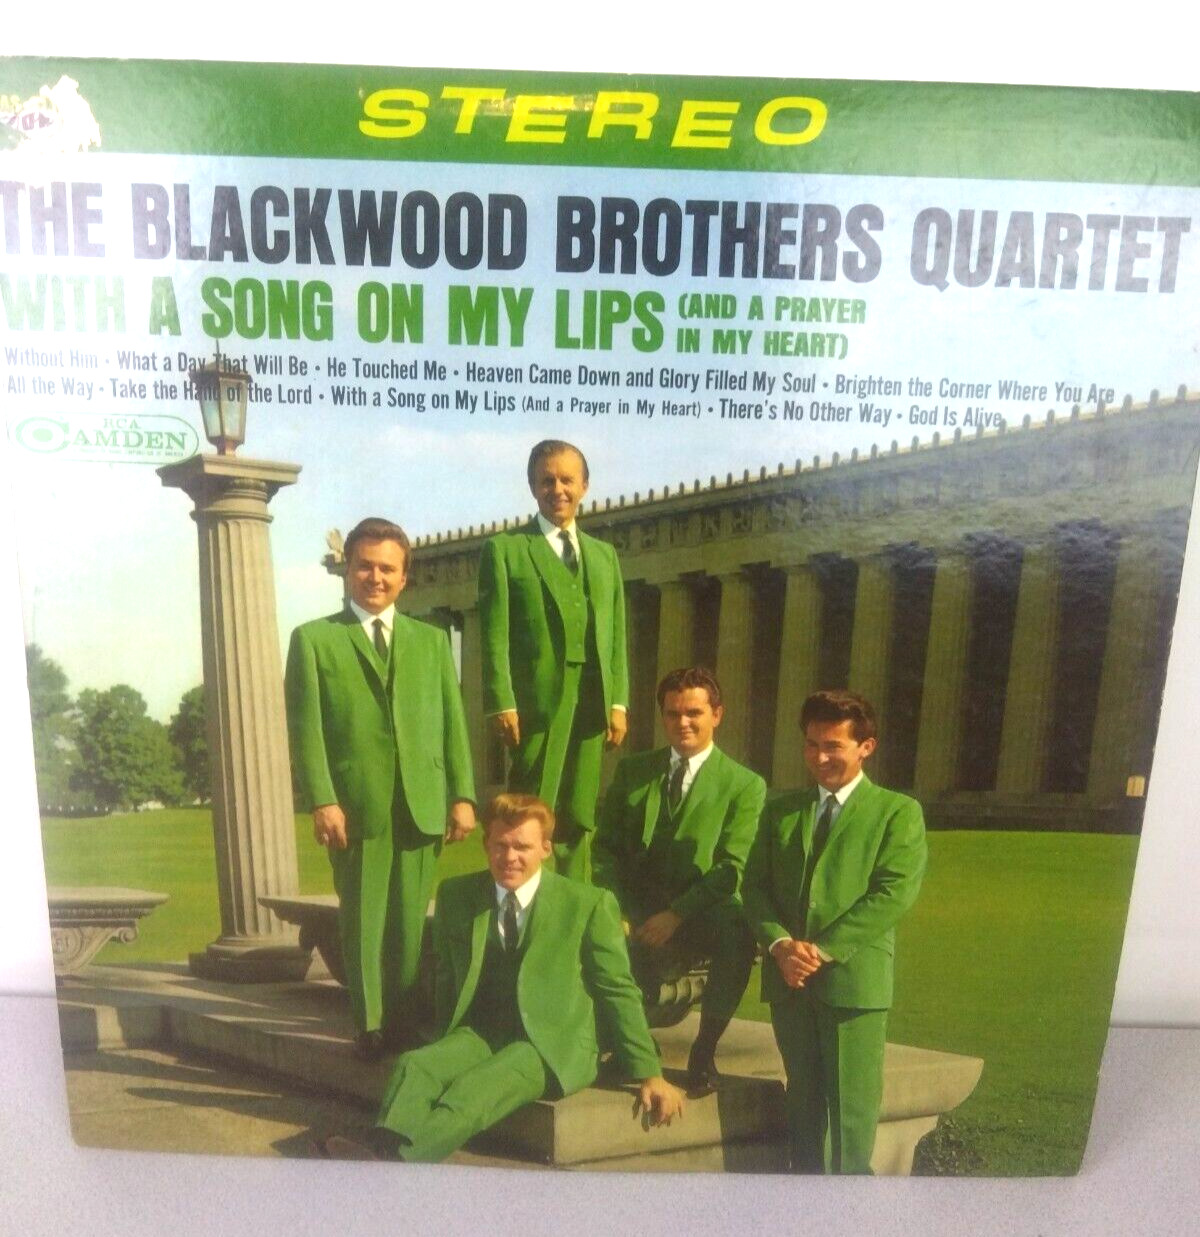 The Blackwood Brothers With A Song on My Lips Gospel Record Album - 1967  (LR45)